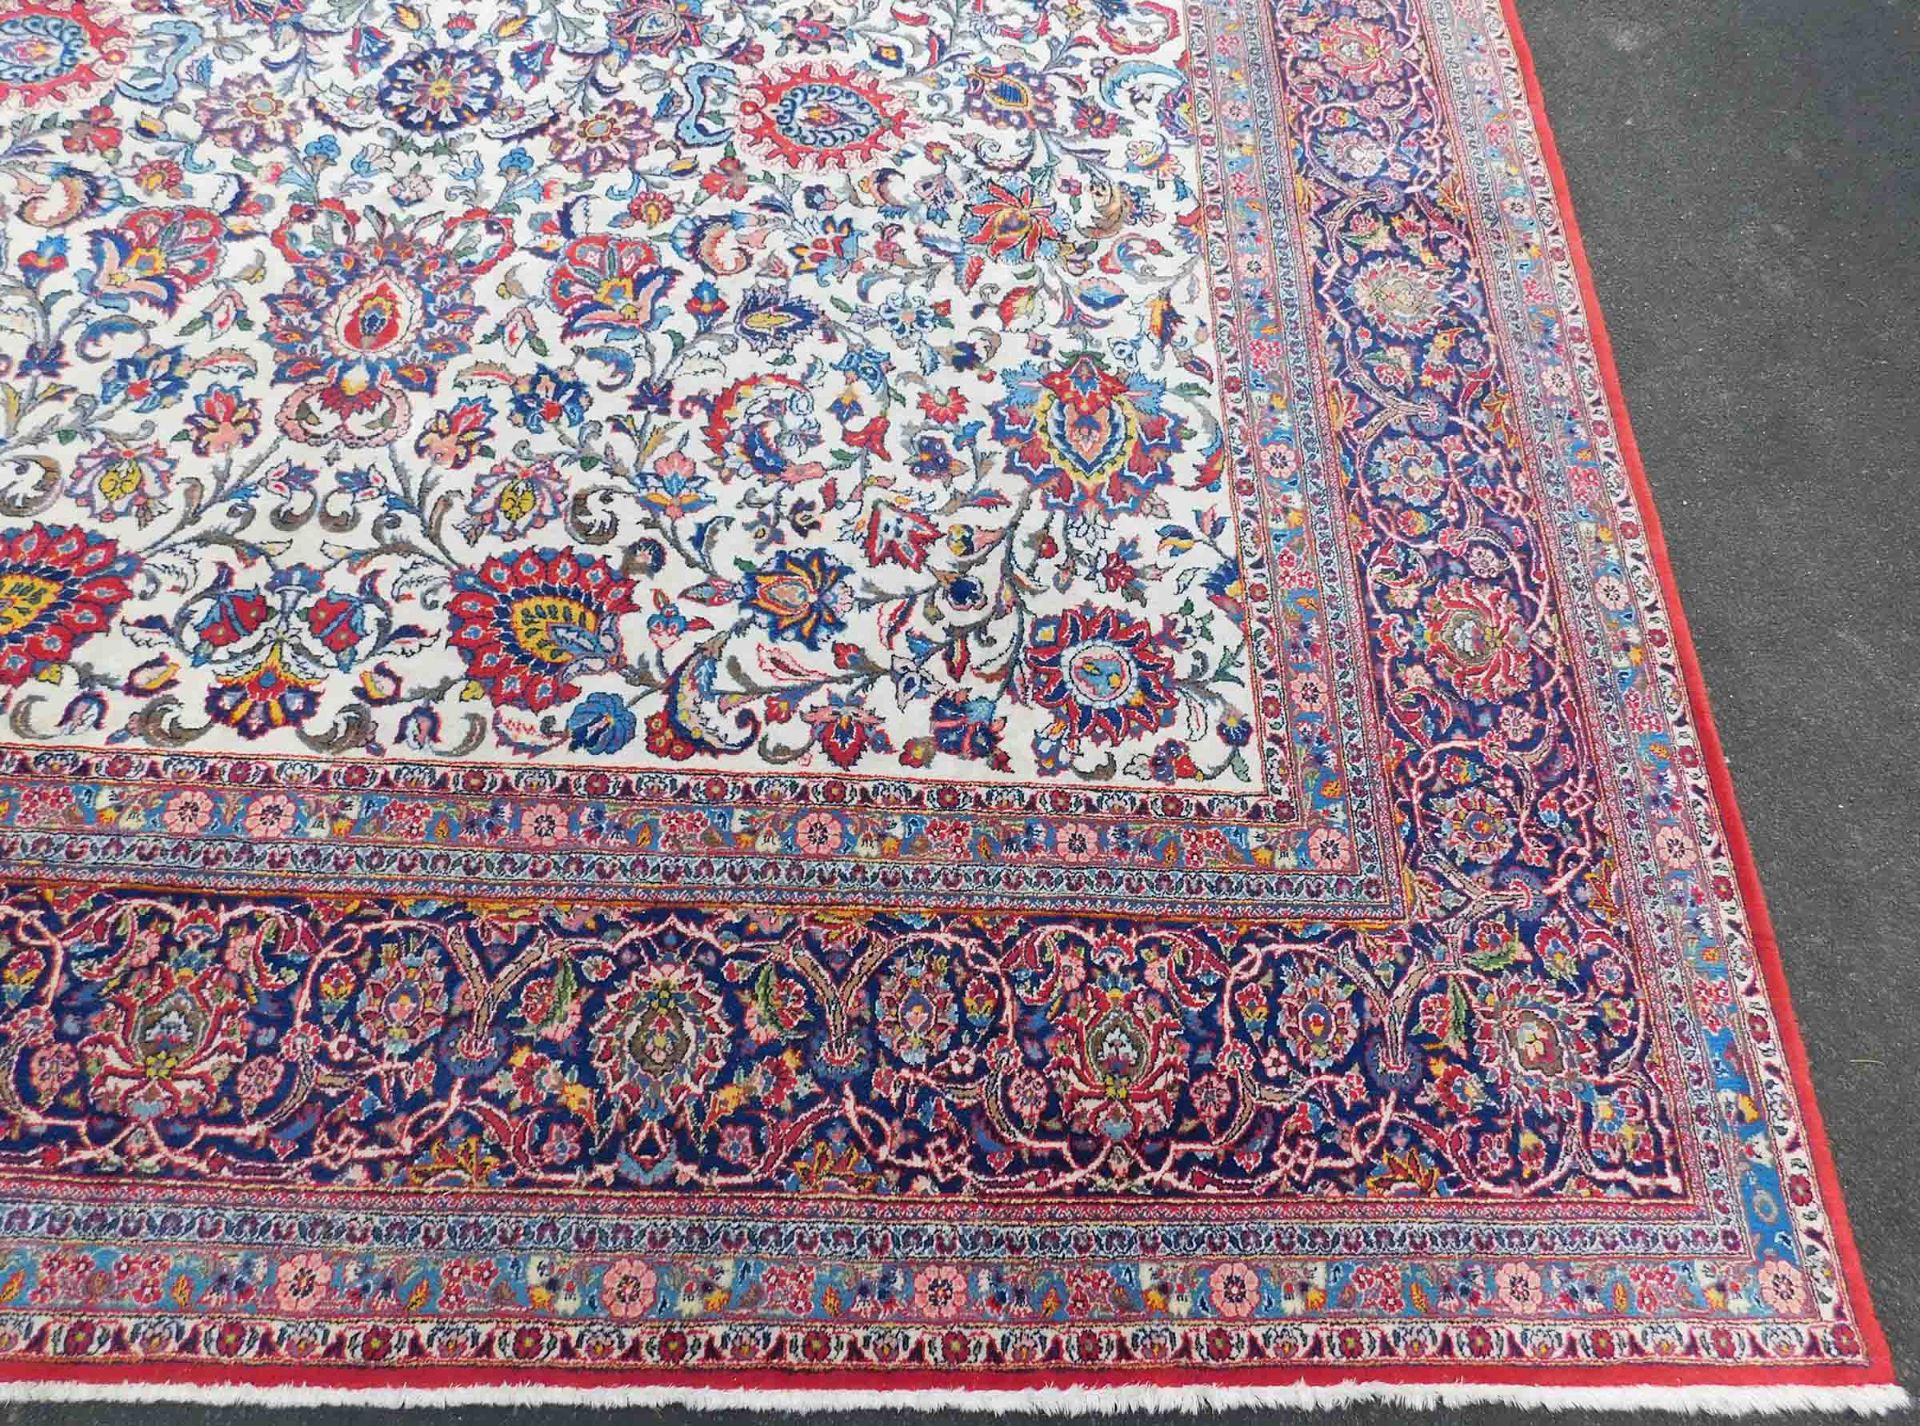 Keschan Persian carpet. Iran. Very fine weave. Cork wool.445 cm x 320 cm. Knotted by hand. Cork wool - Image 4 of 10